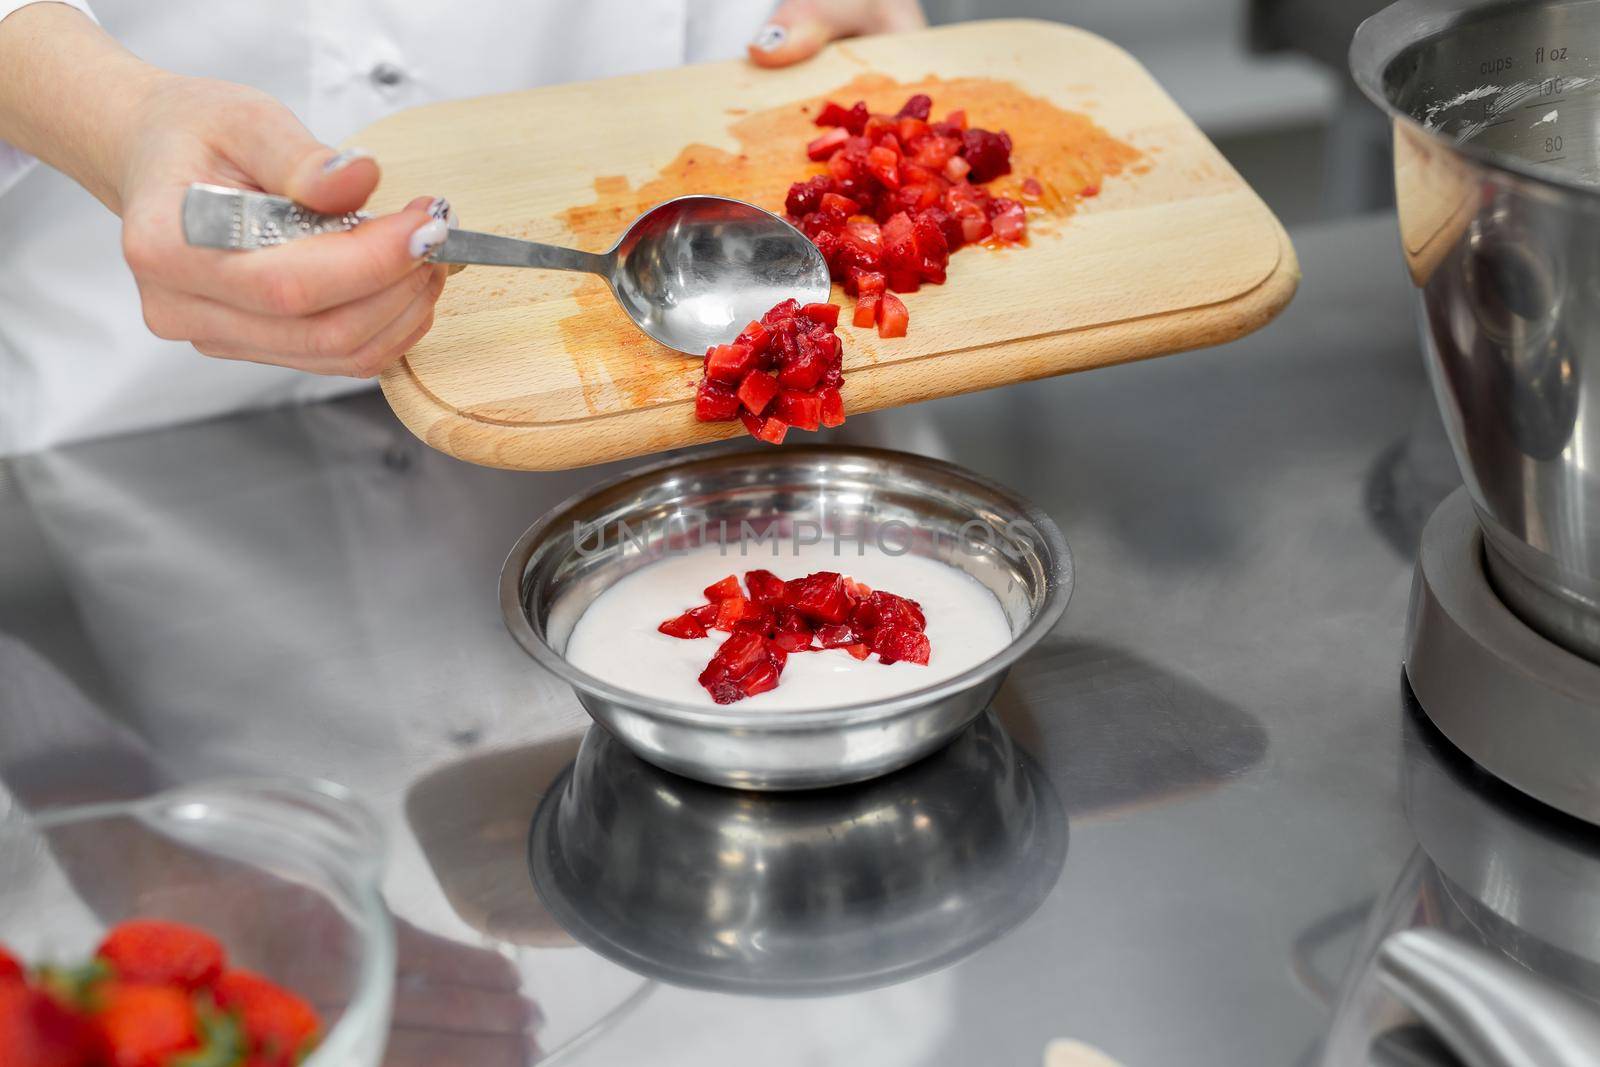 Pastry chef adds sliced strawberries to the cream by StudioPeace